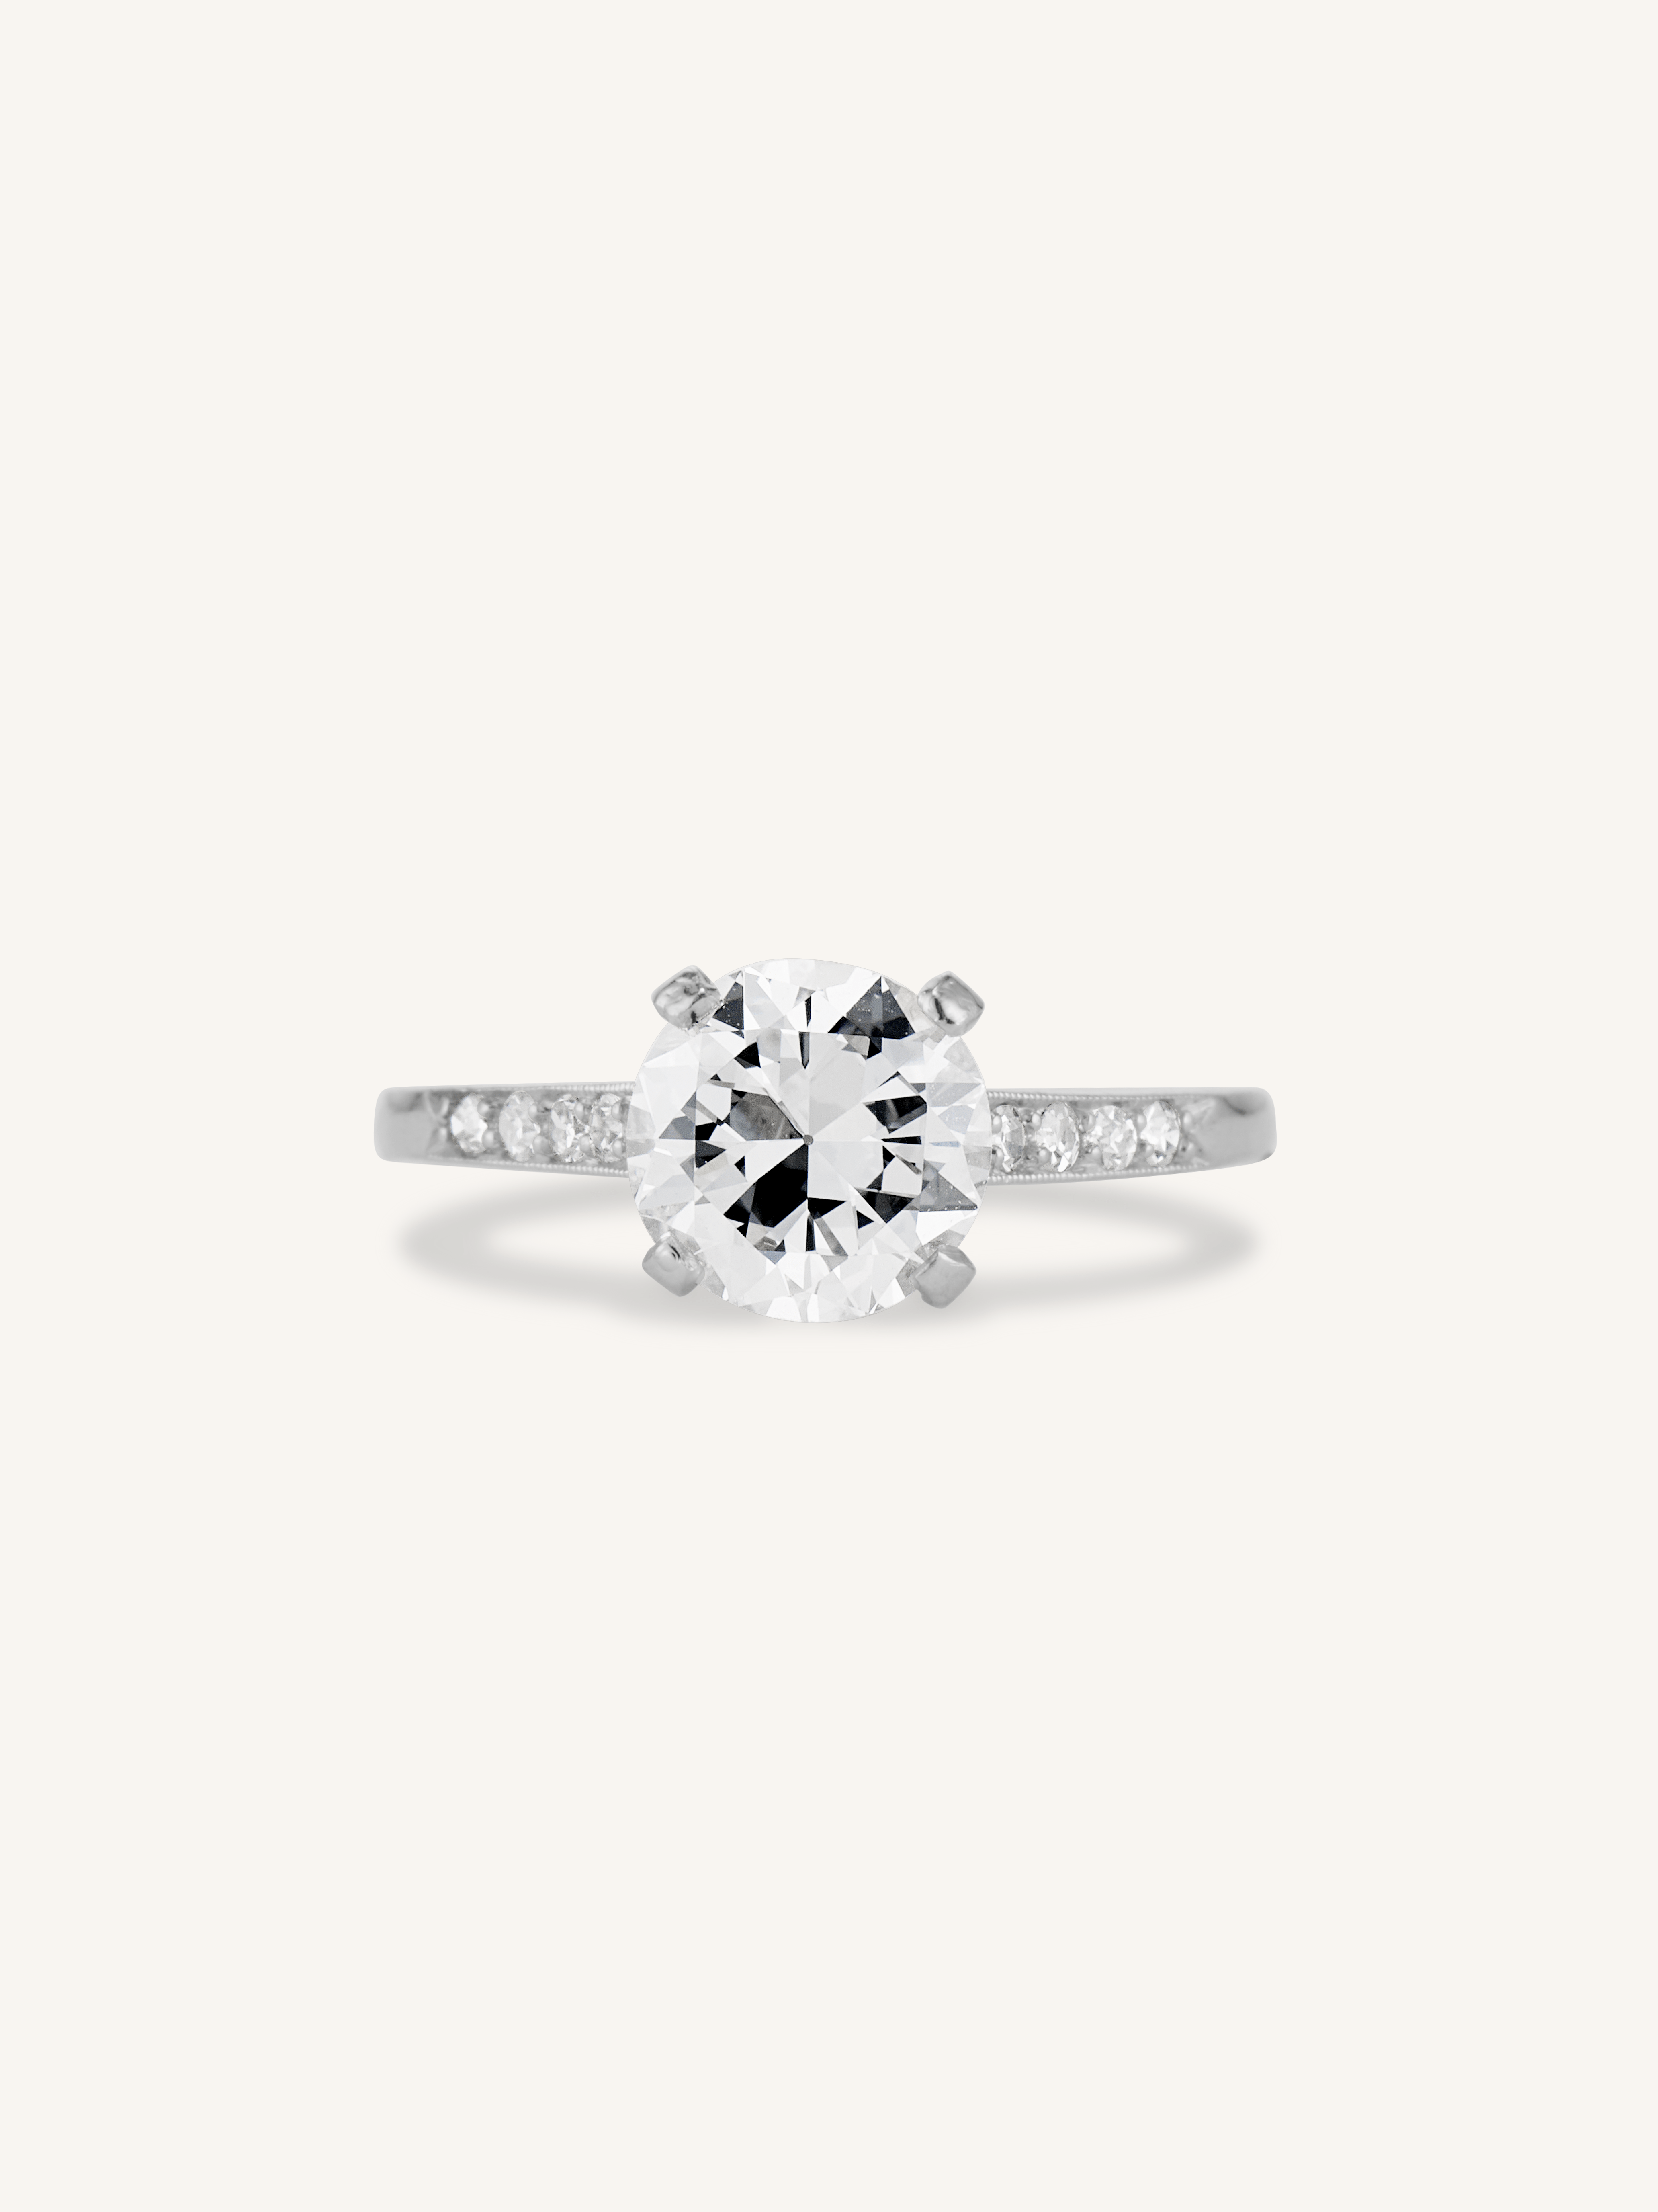 Classic Engagement Ring Designs That Never Go Out of Style — Borsheims